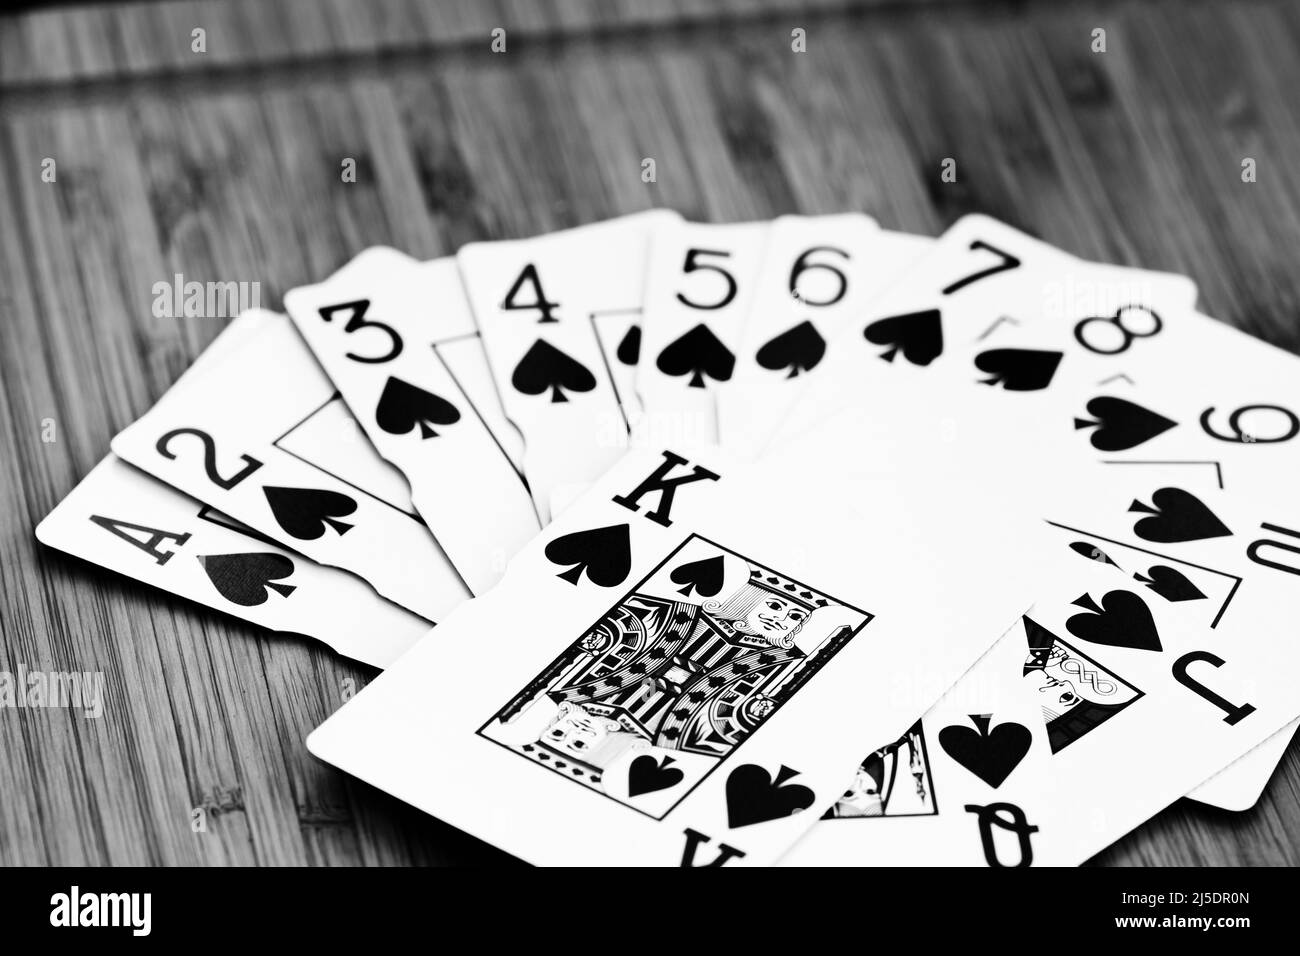 Fan of playing cards close up, isolated on wooden table. Casino concept, risk, chance, good luck or gambling. Stock Photo